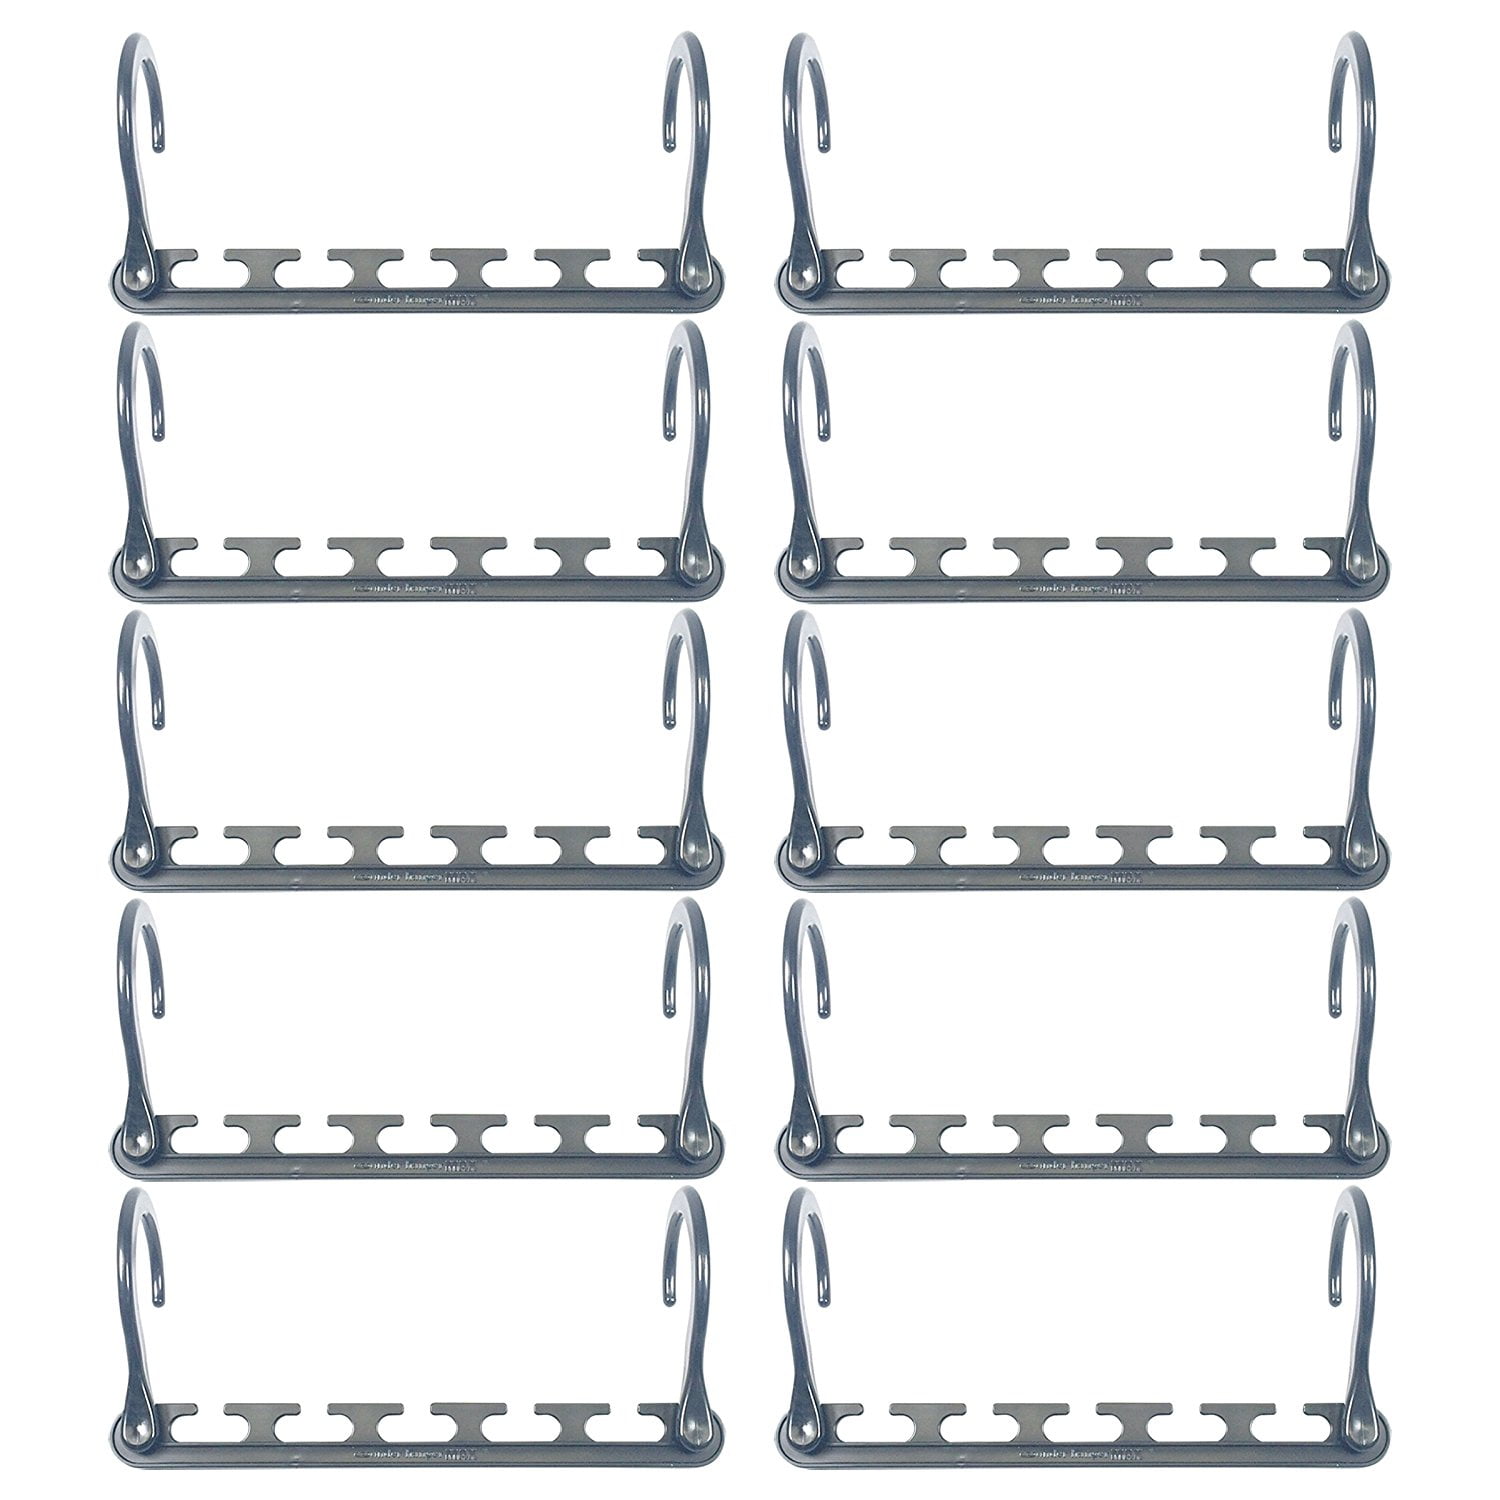 Wonder Hanger Max New & Improved Pack of 10-3x The Closet Space for Easy, 